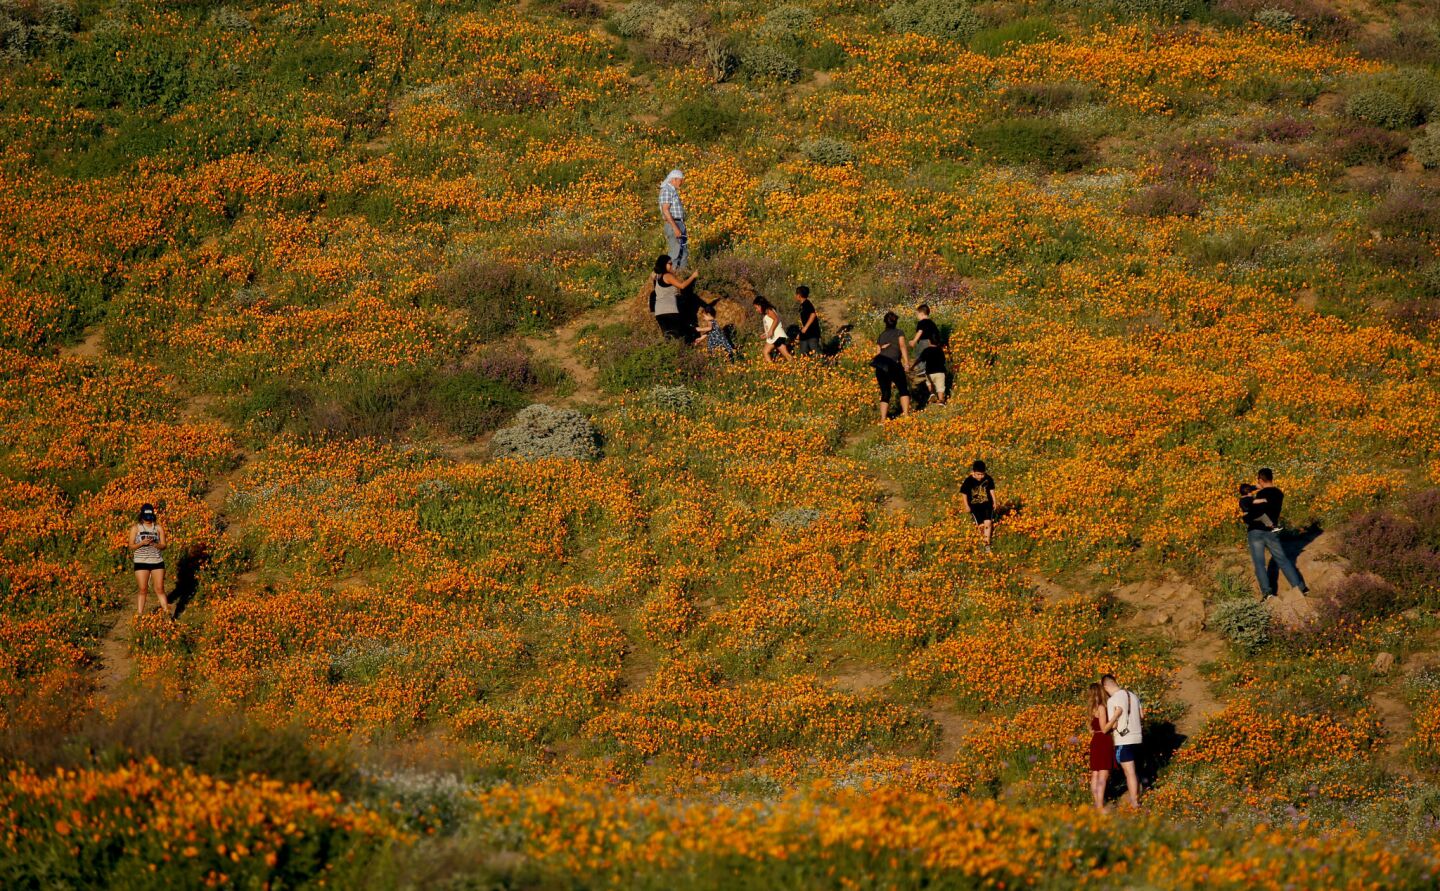 The hillsides are filled with California Poppies at Walker Canyon Temescal Mountains near Lake Elsinore in Riverside County.